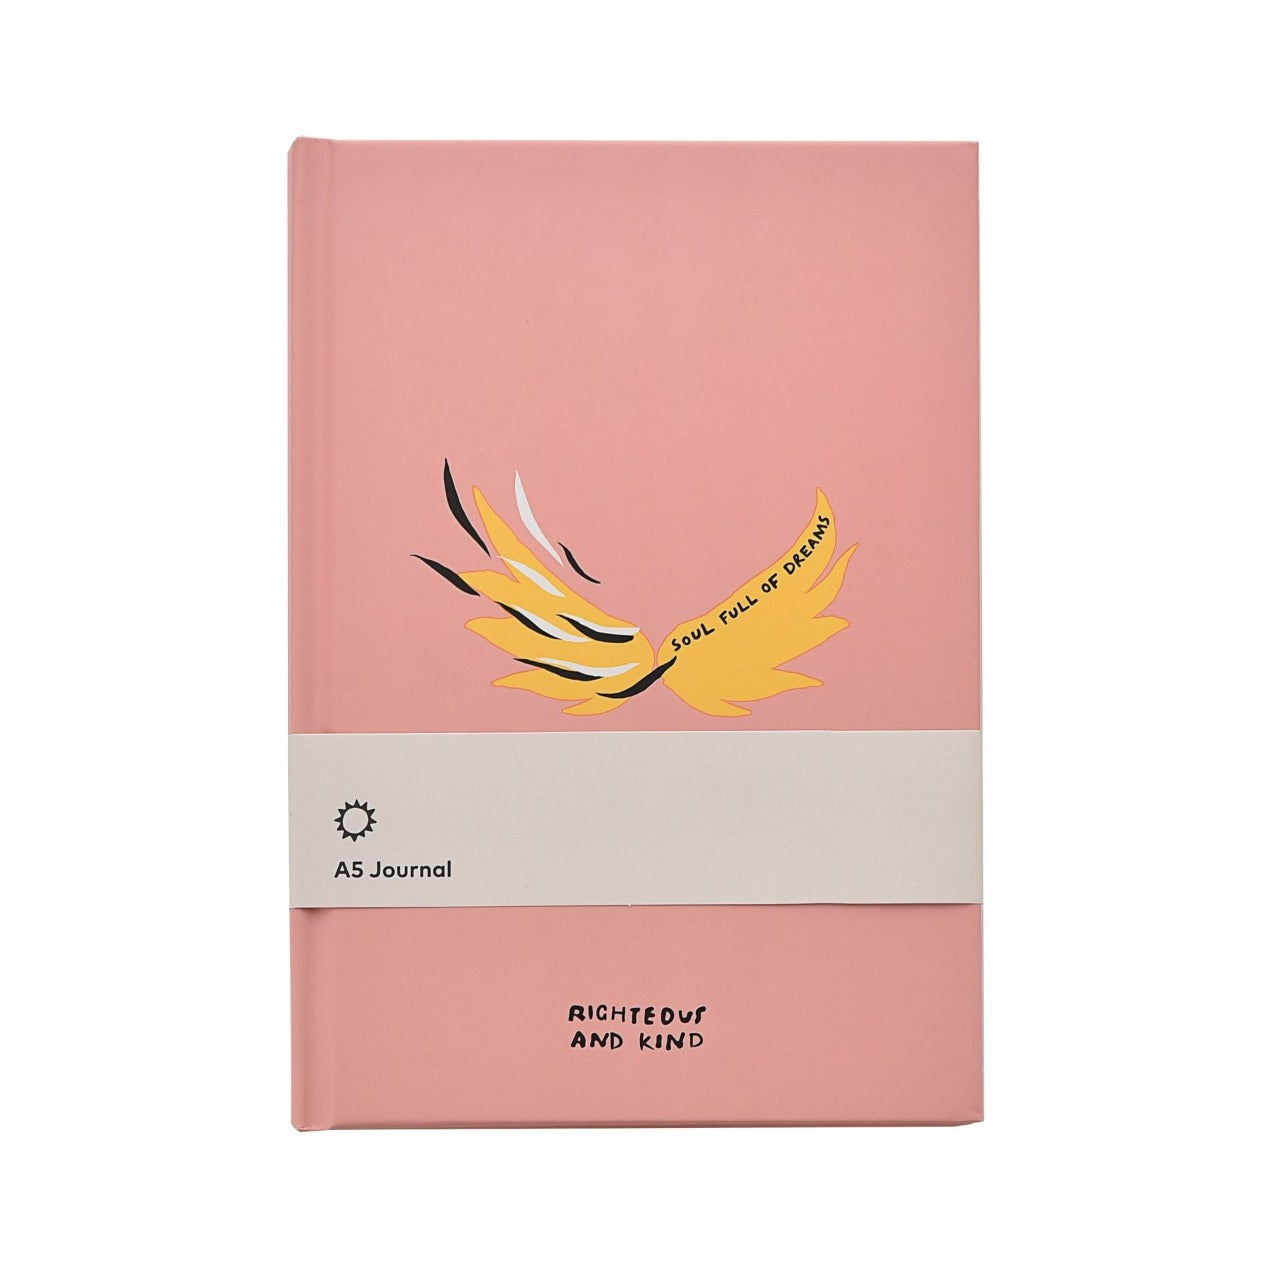 Righteous & Kind A5 Wings Journal  A stylish notebook that would make a beautiful gift for those who love to note down their thoughts or doodle. With a gold wing design, this would make a cute addition to any free spirit's stationary collection.